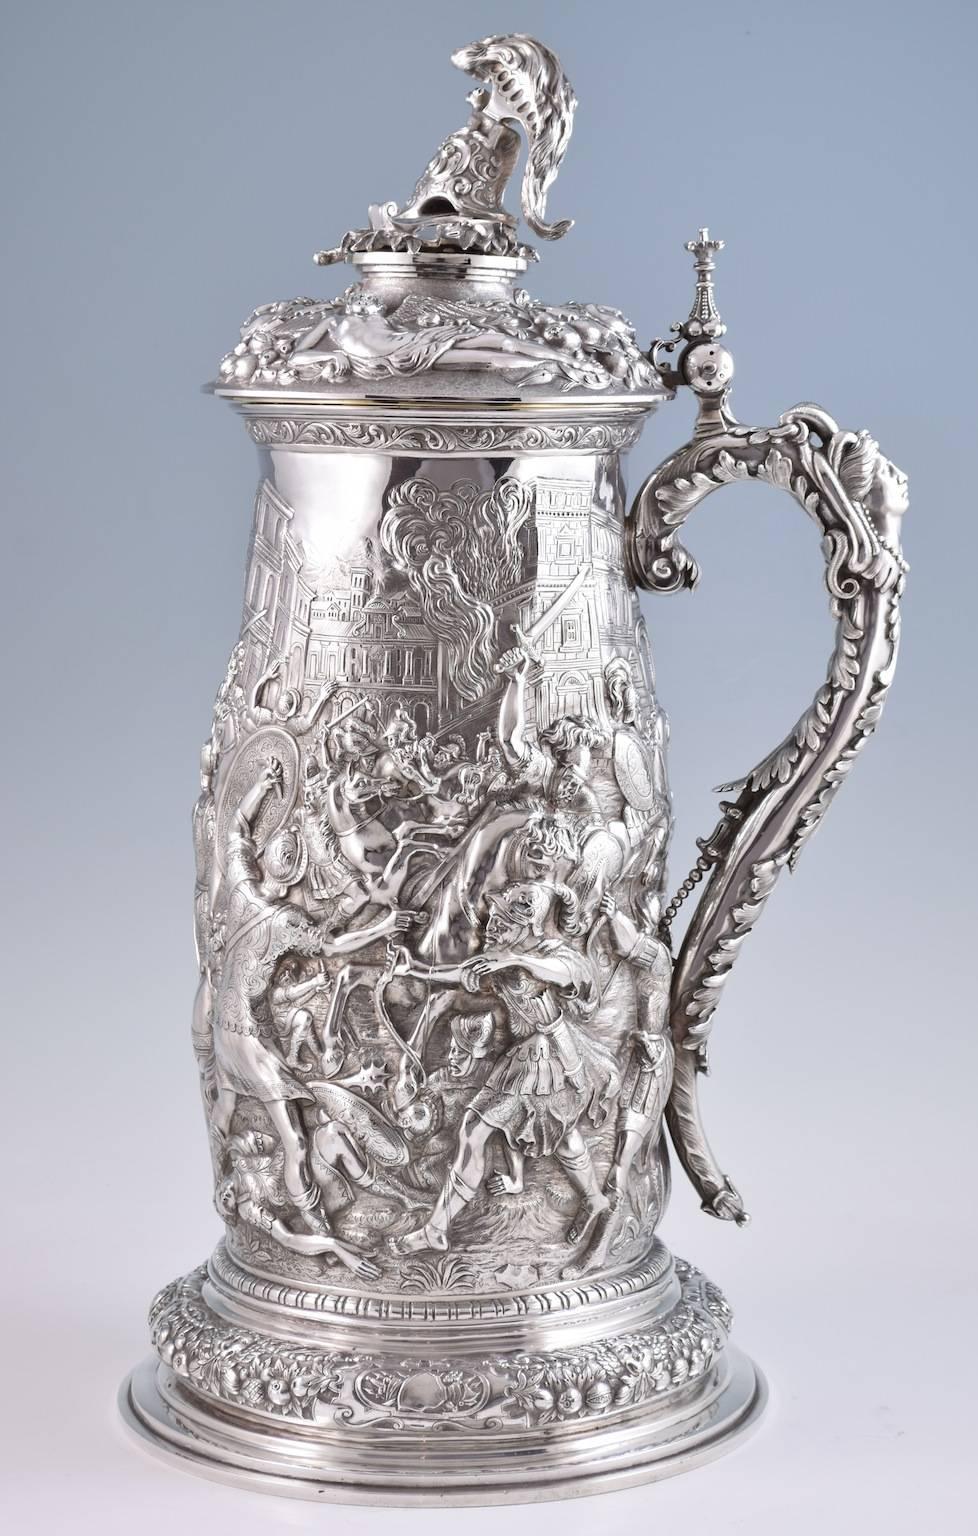 Monumental Sterling Silver Lidded Tankard by Elkington & Co. Birmingham, 1861 In Excellent Condition For Sale In London, GB